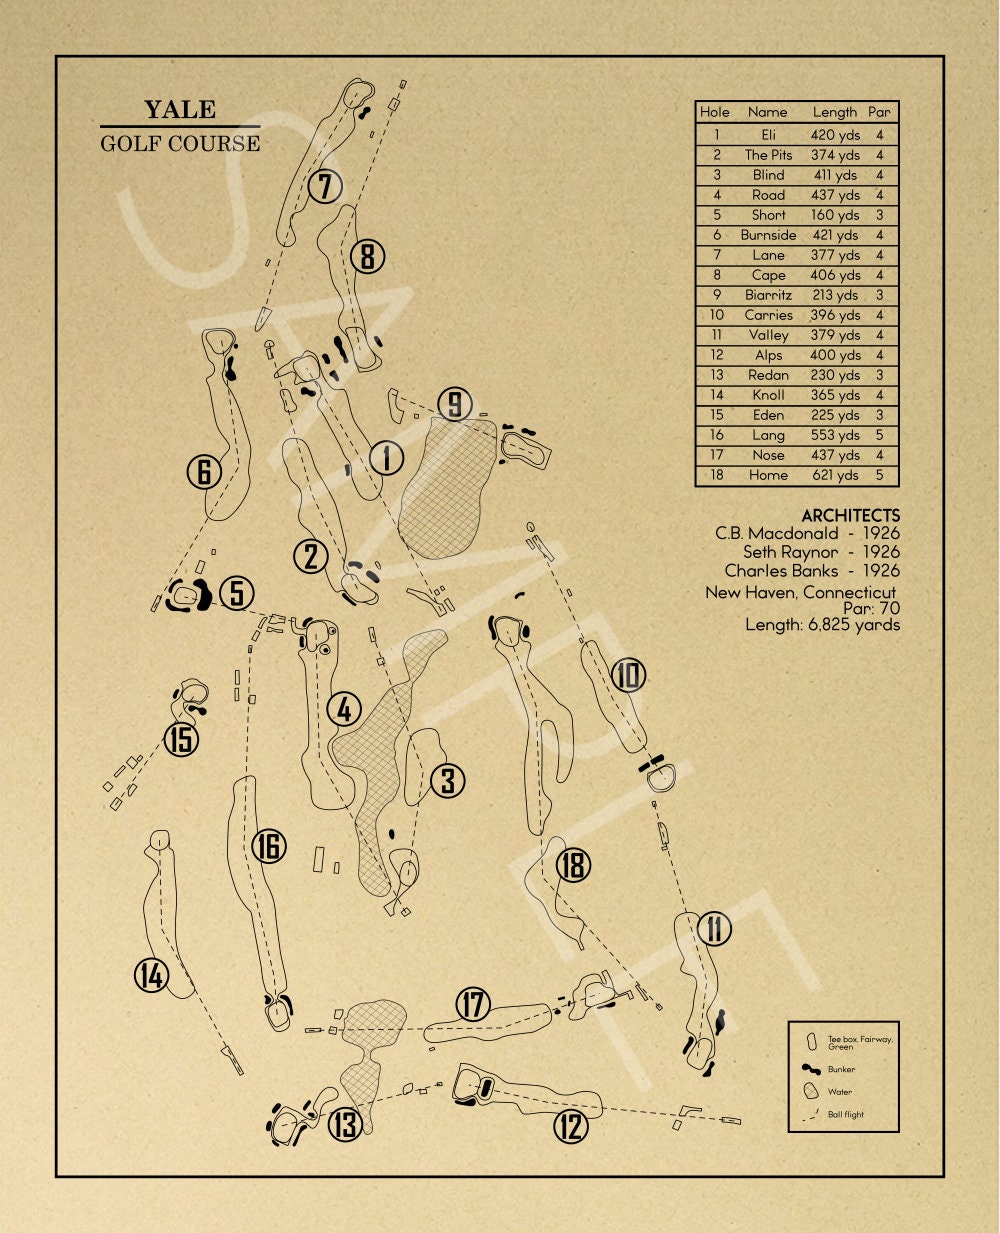 Yale Golf Course Outline (Print)